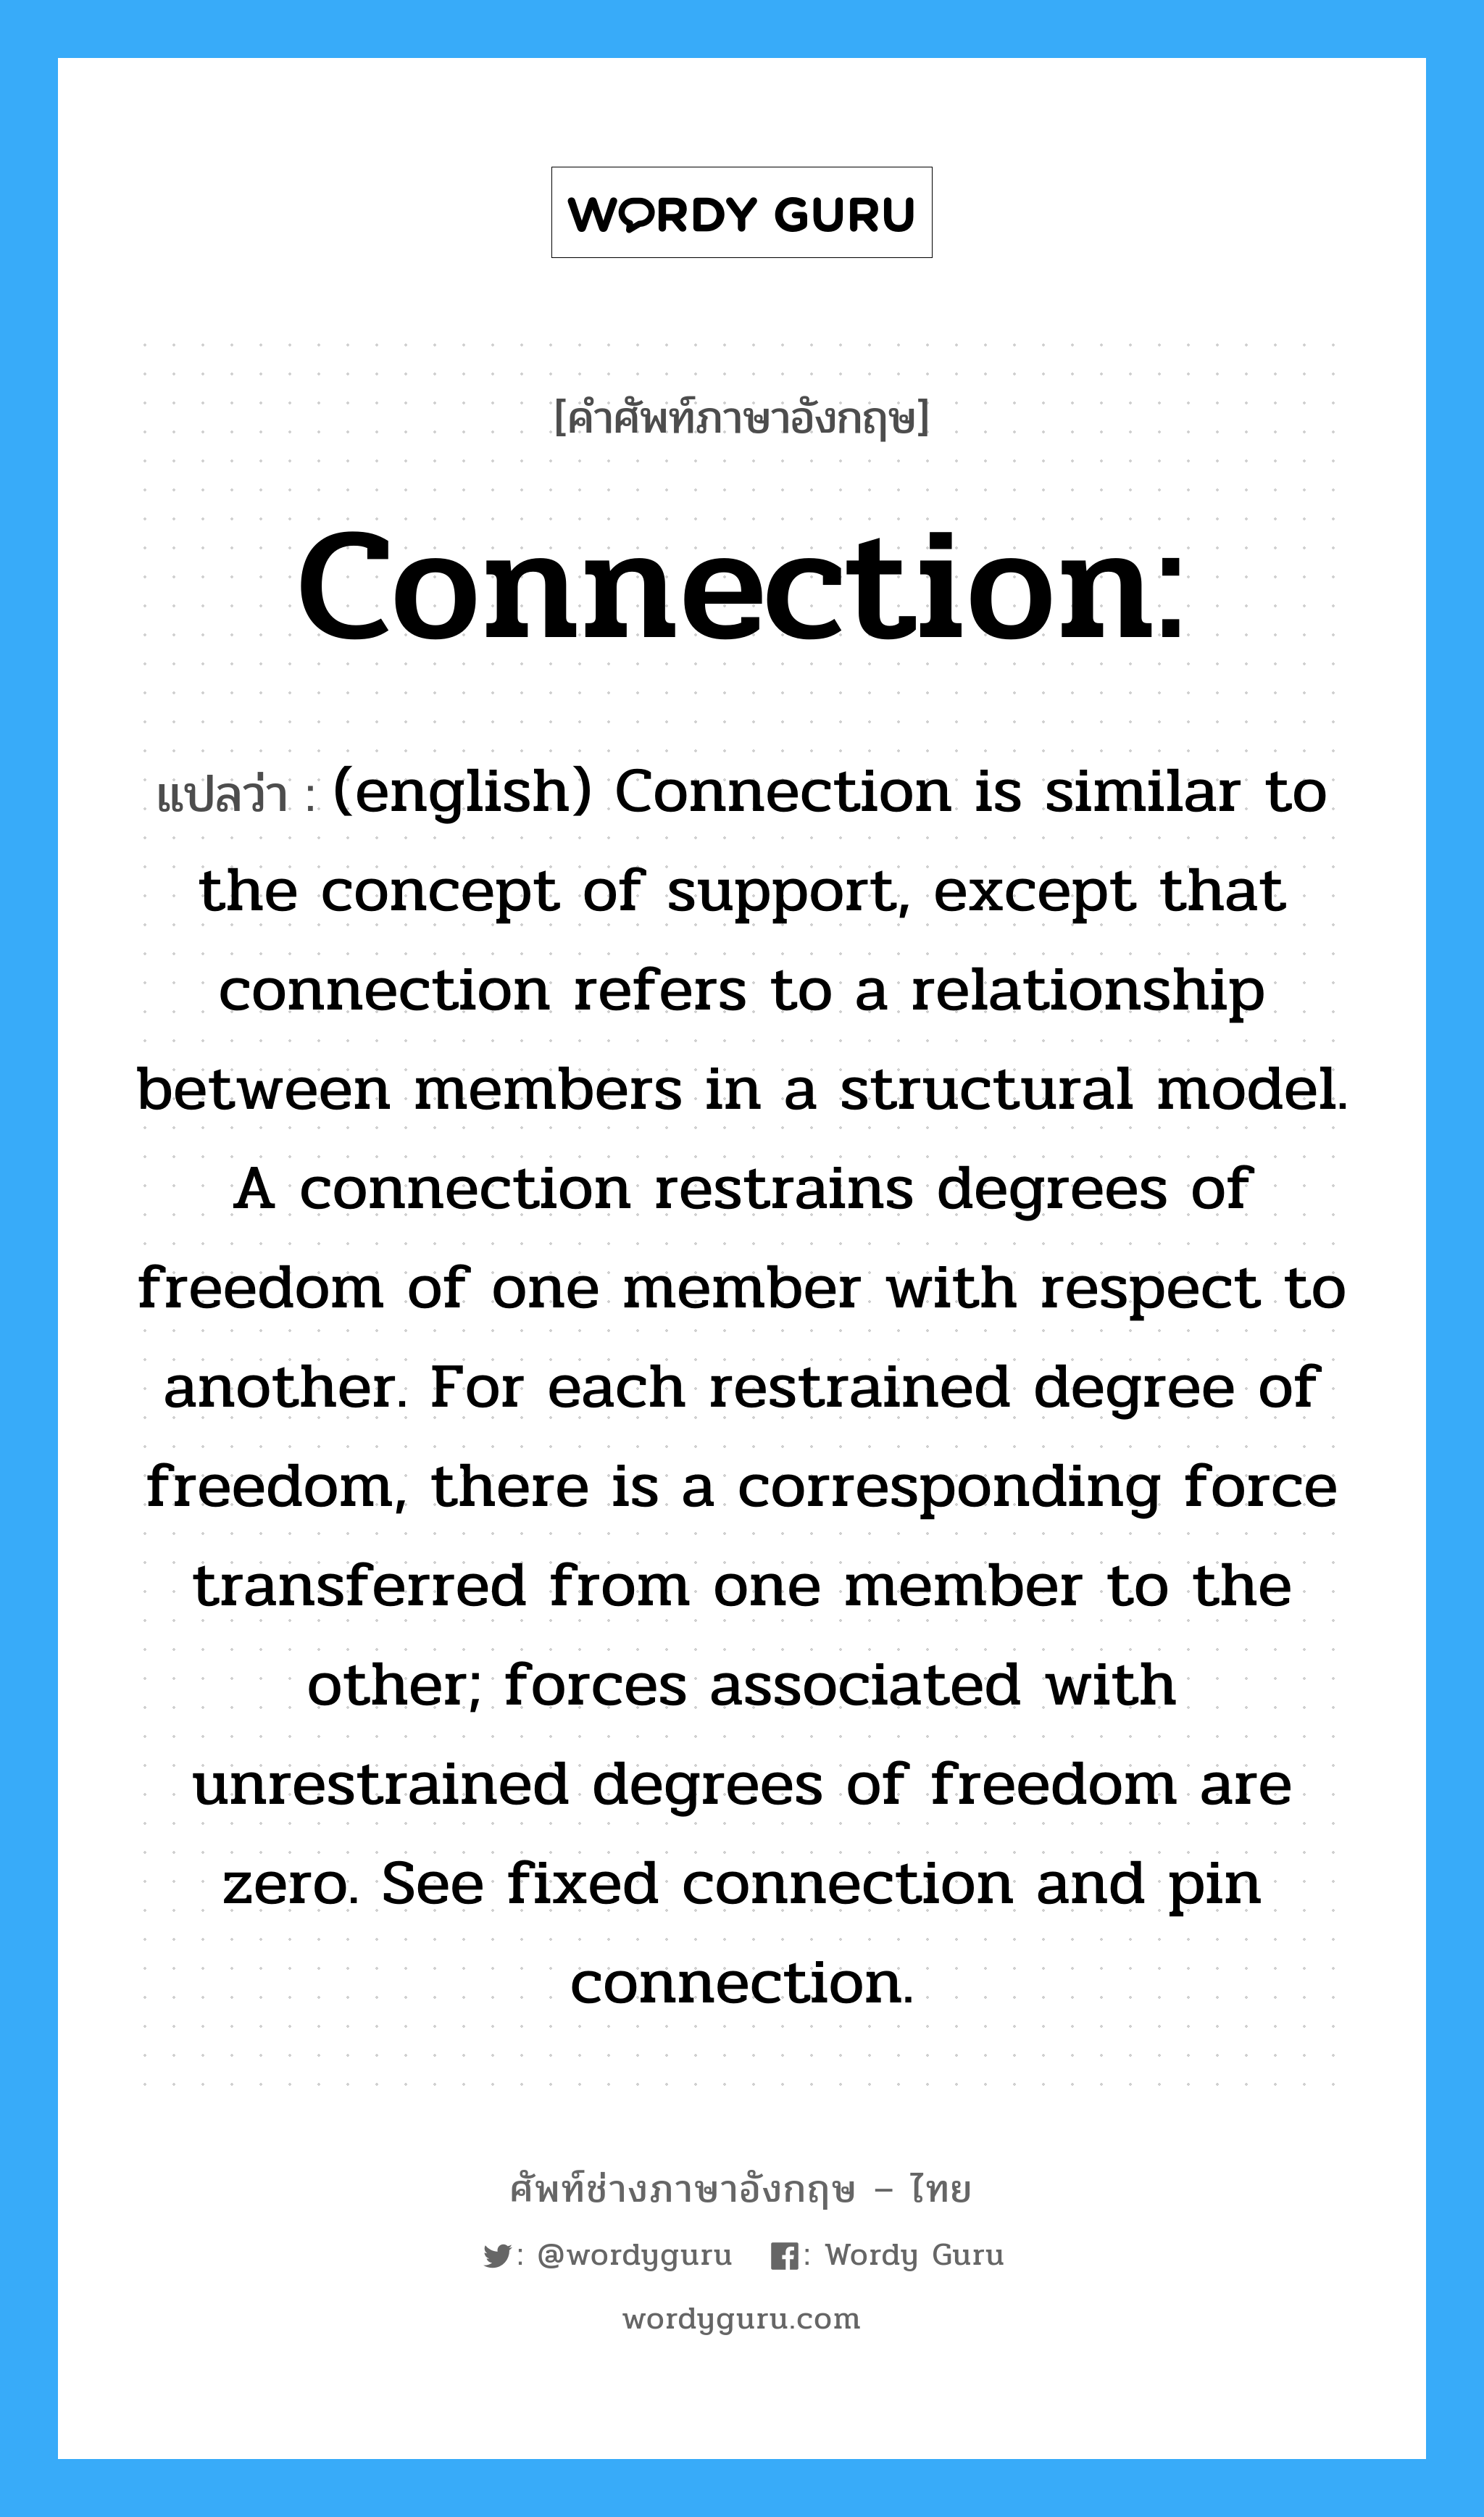 Connection: แปลว่า?, คำศัพท์ช่างภาษาอังกฤษ - ไทย Connection: คำศัพท์ภาษาอังกฤษ Connection: แปลว่า (english) Connection is similar to the concept of support, except that connection refers to a relationship between members in a structural model. A connection restrains degrees of freedom of one member with respect to another. For each restrained degree of freedom, there is a corresponding force transferred from one member to the other; forces associated with unrestrained degrees of freedom are zero. See fixed connection and pin connection.